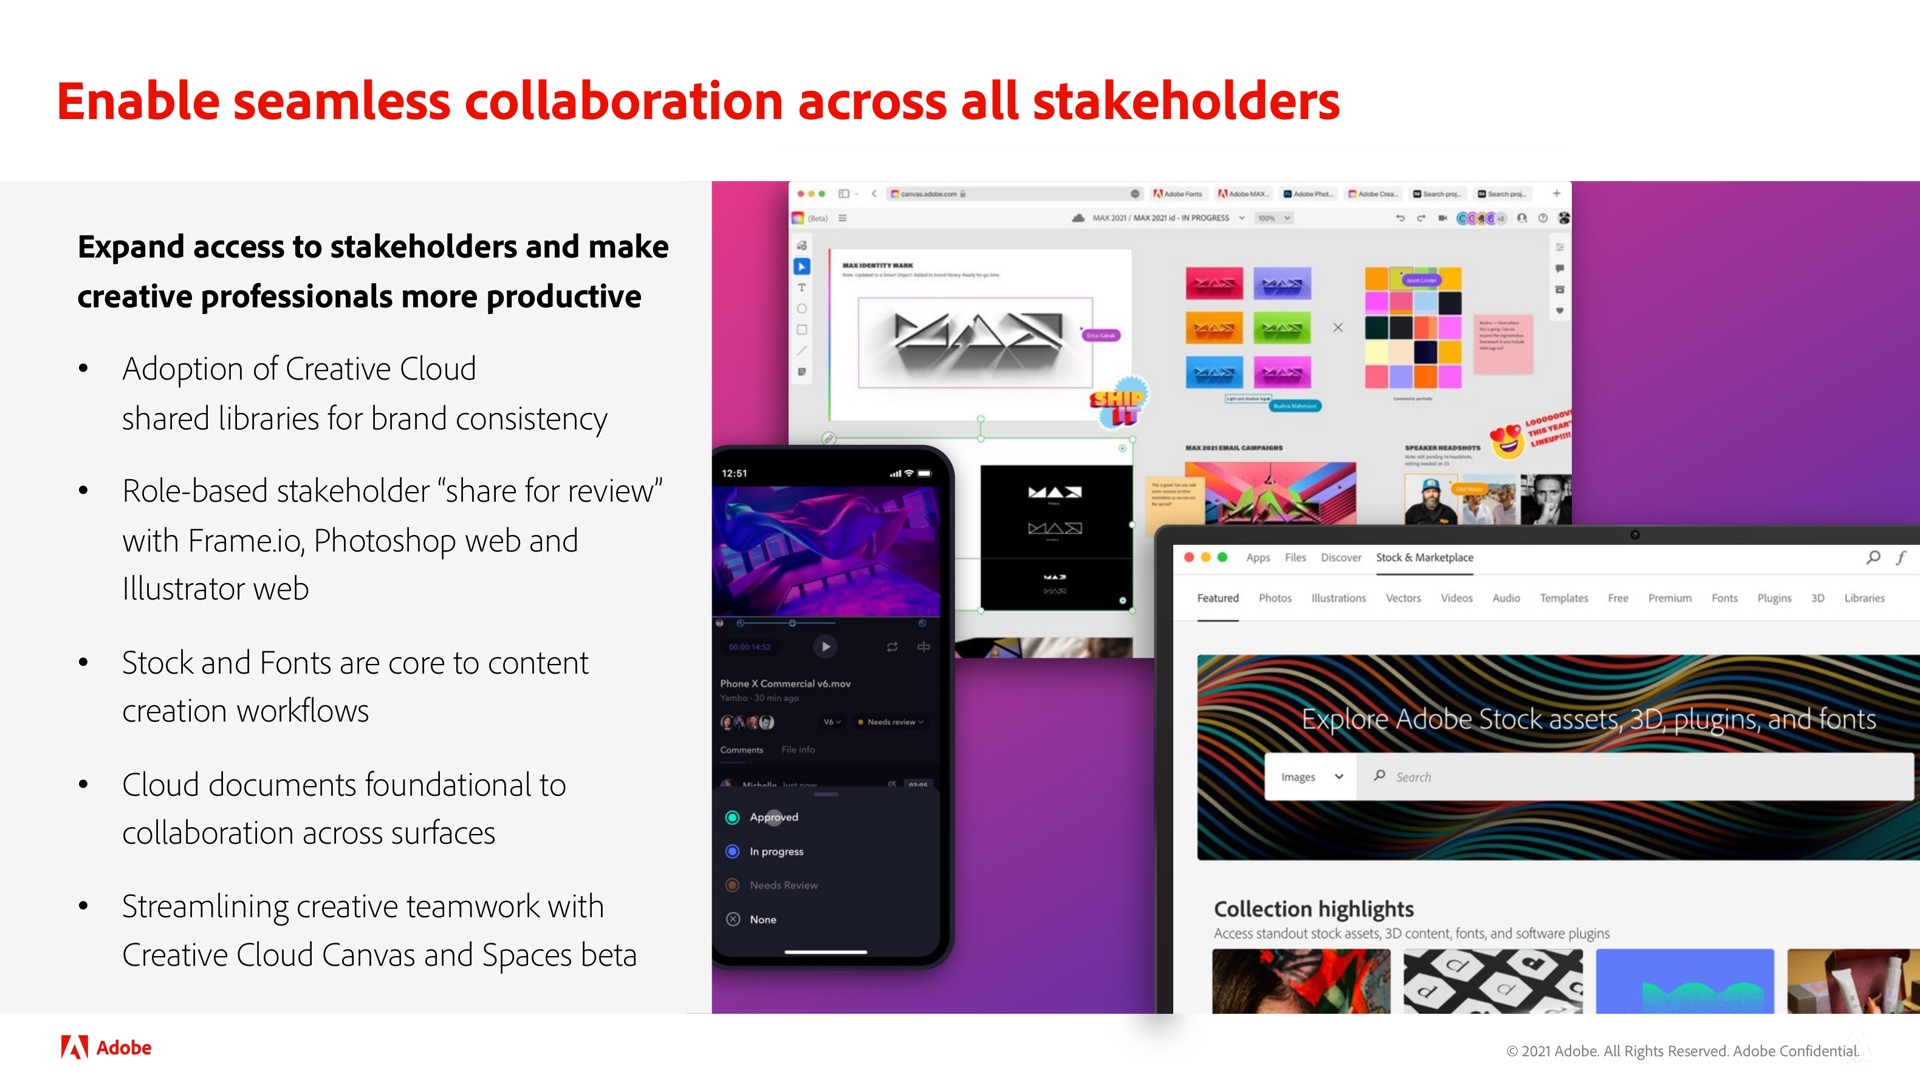 enable seamless collaboration across all stakeholders | Adobe